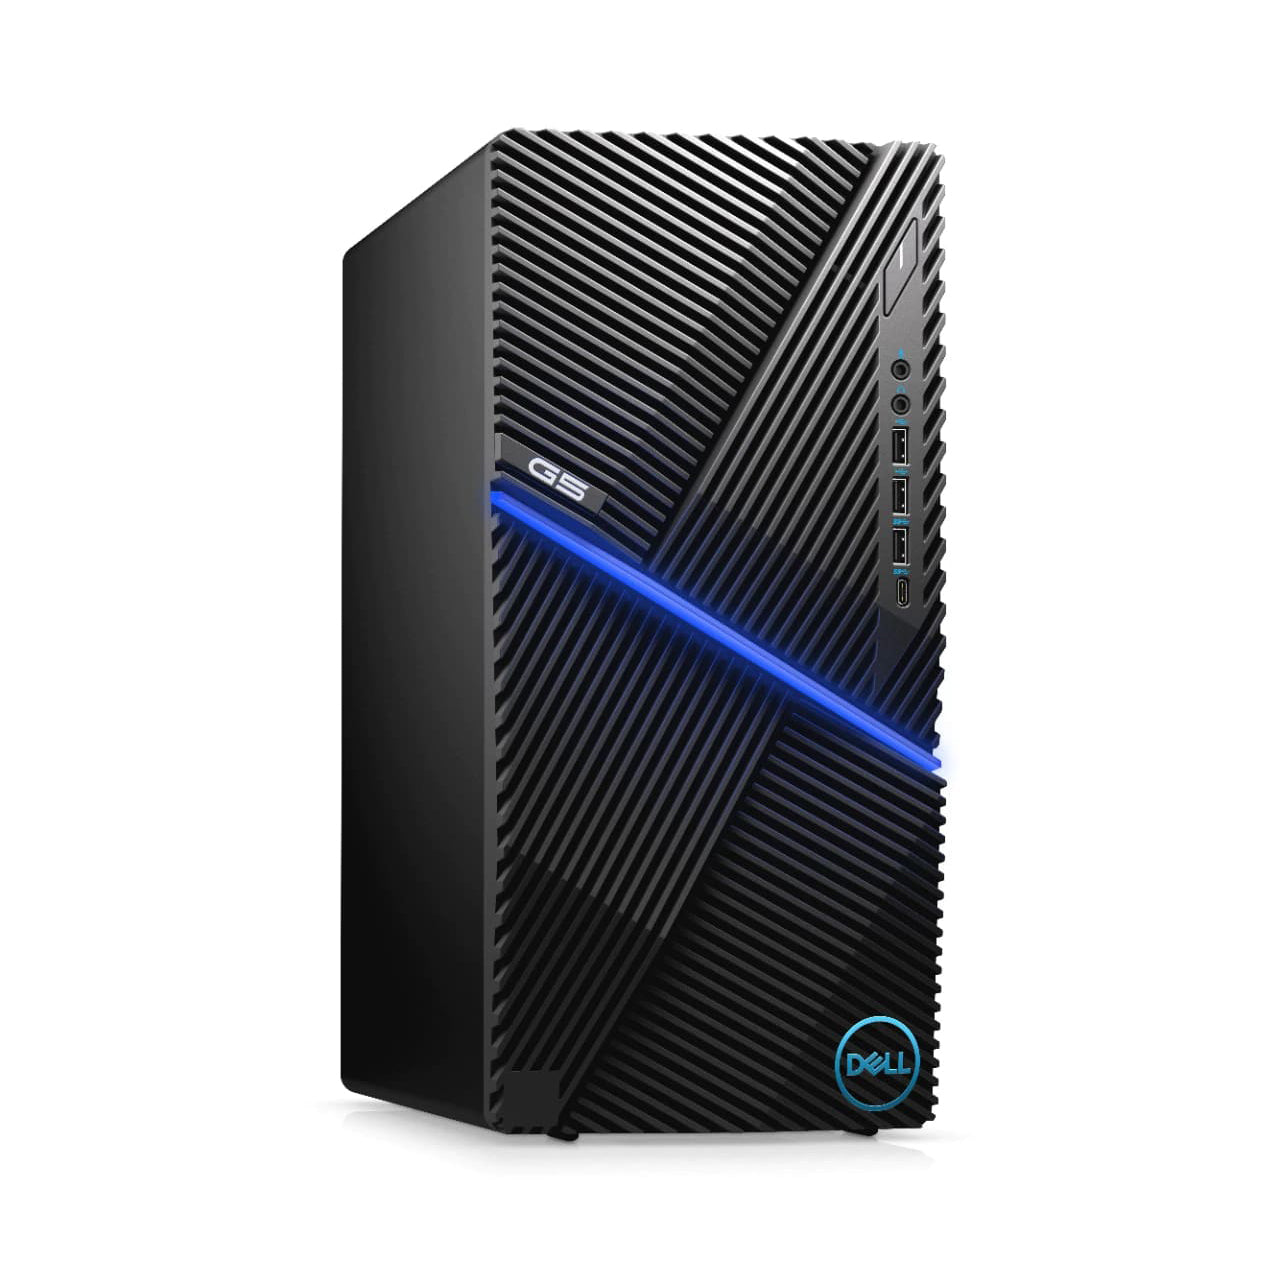 Dell G5-5000 Core i7-10700f Rtx 3070 Gaming Desktop Offers (Brand New)